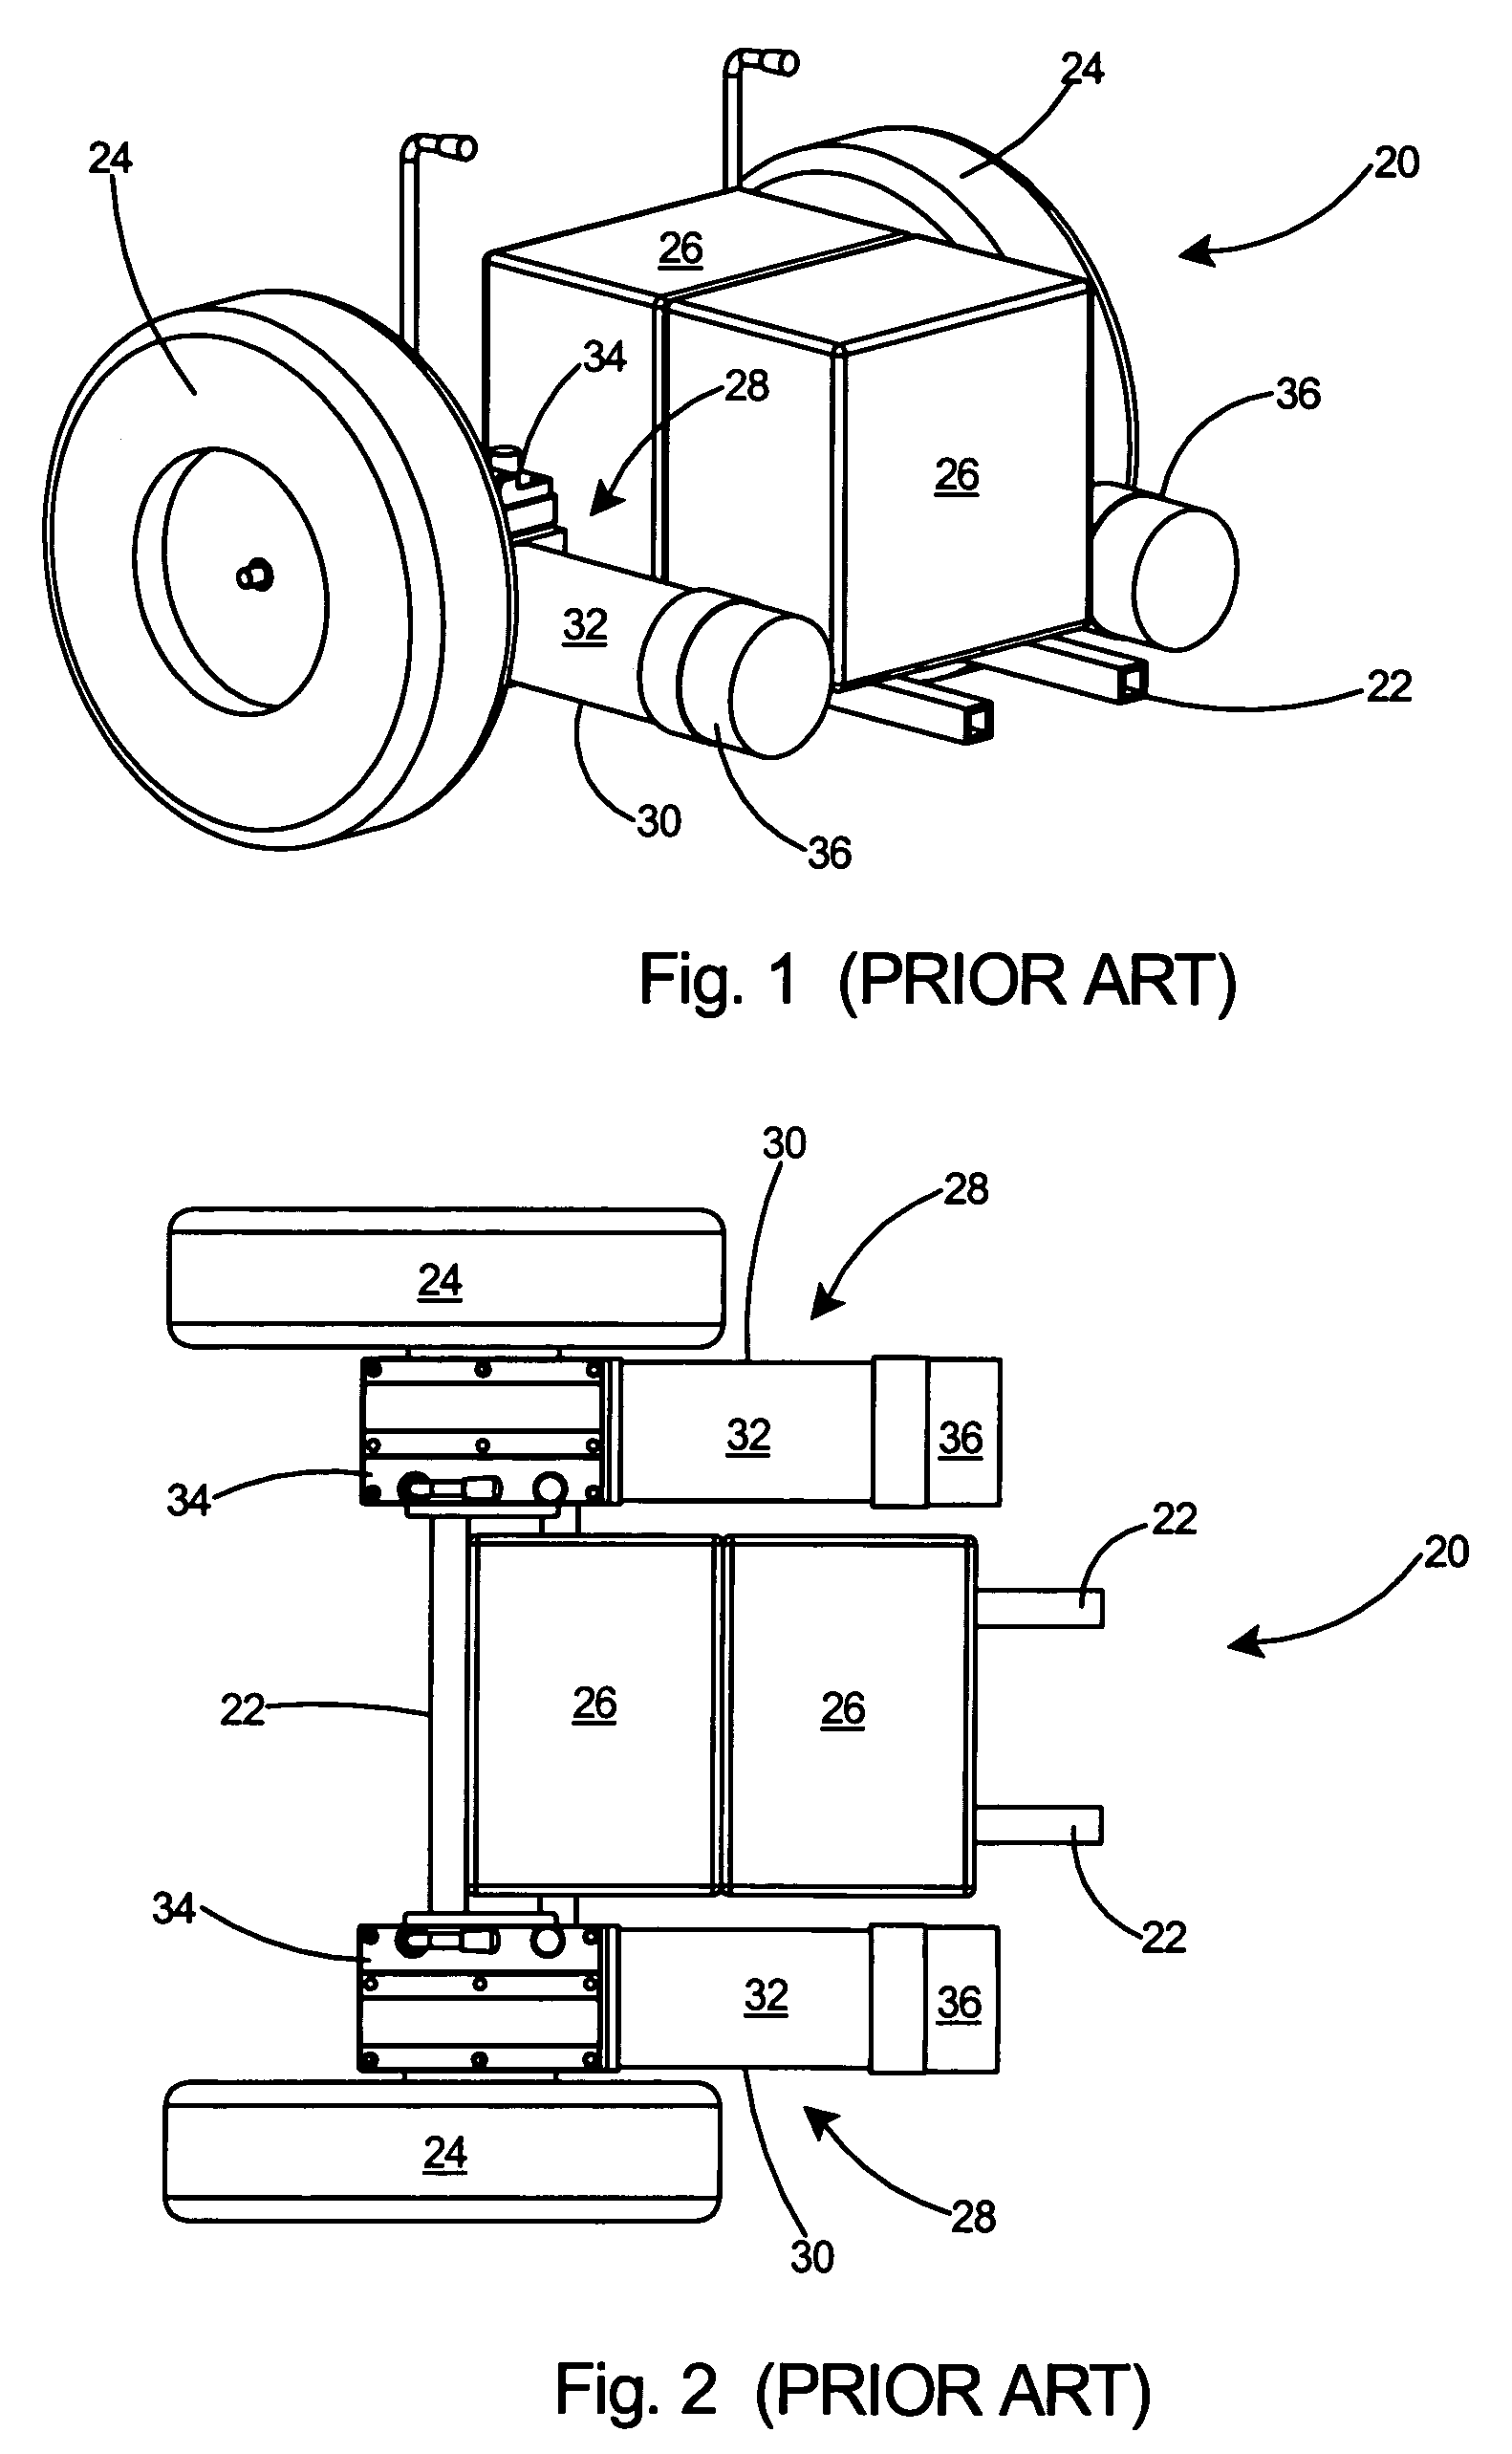 Compact drive mechanism for electrically powered vehicle